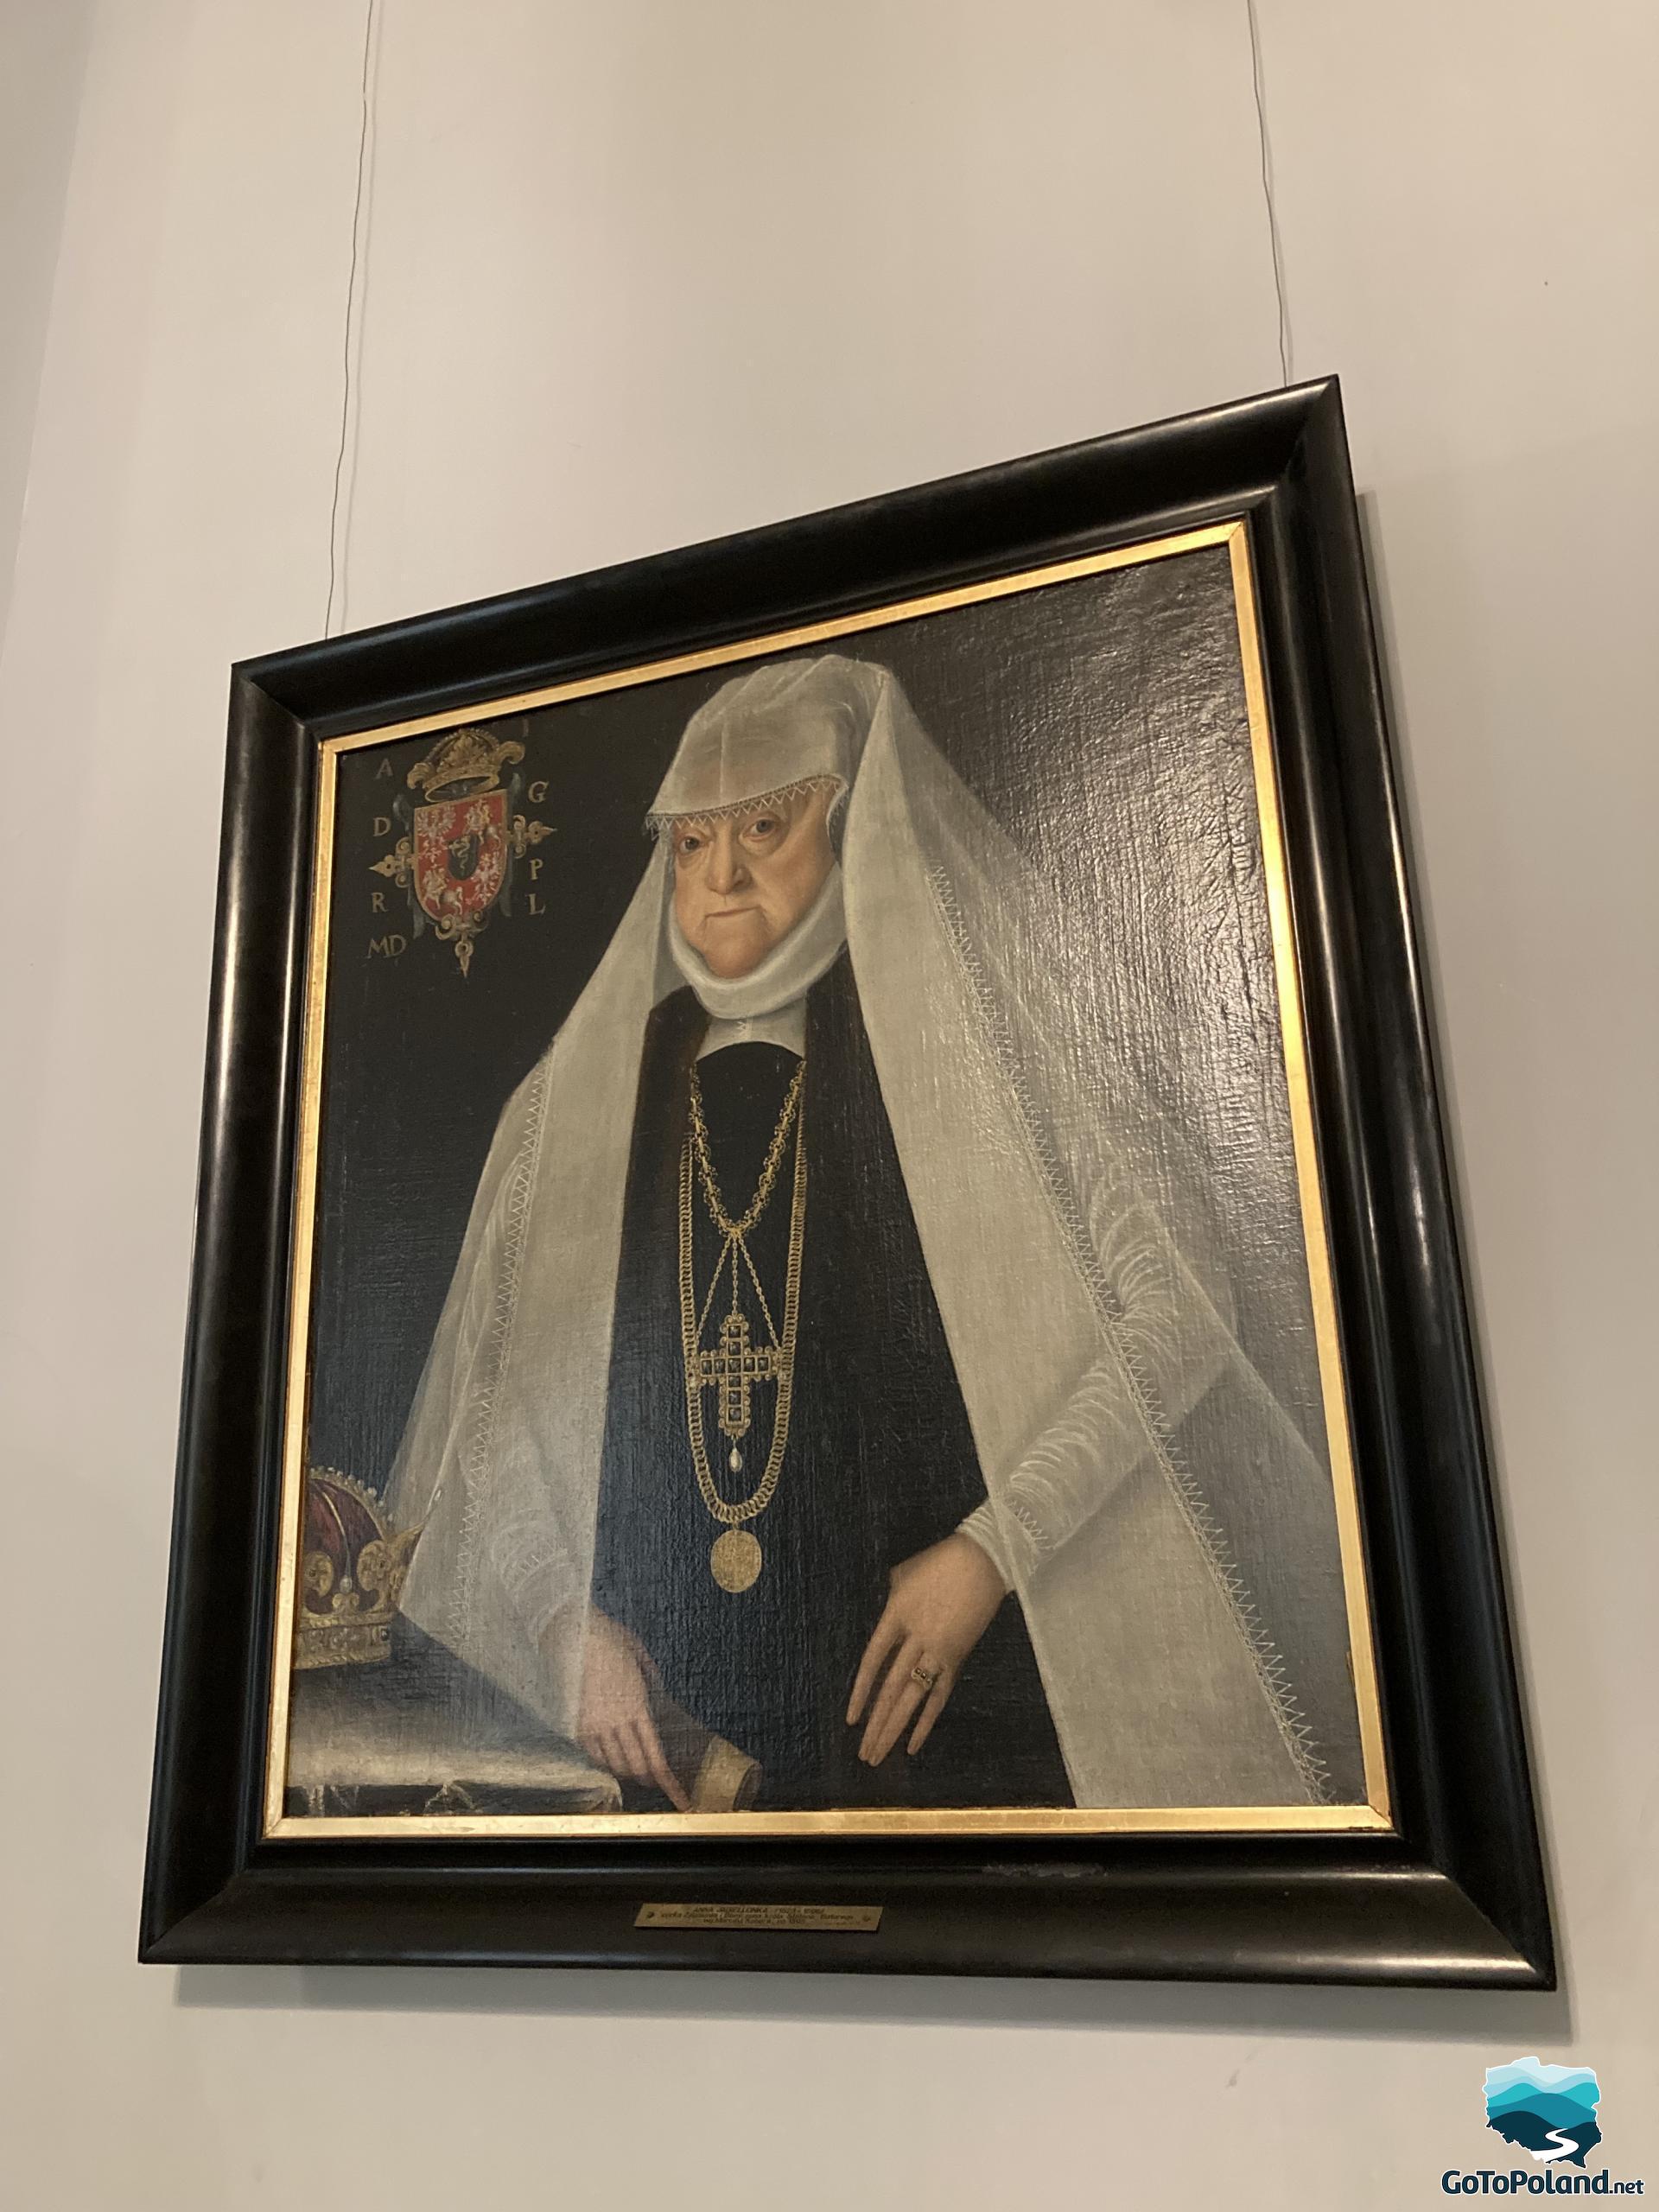 the hanging portrait shows a woman in a black dress with gold chains and a cross, the woman has a long white scarf covering her head, arms down to her legs. There is a crown on the side of the saddle. this woman is Anna Jagielonka, queen of Poland in the 16th century